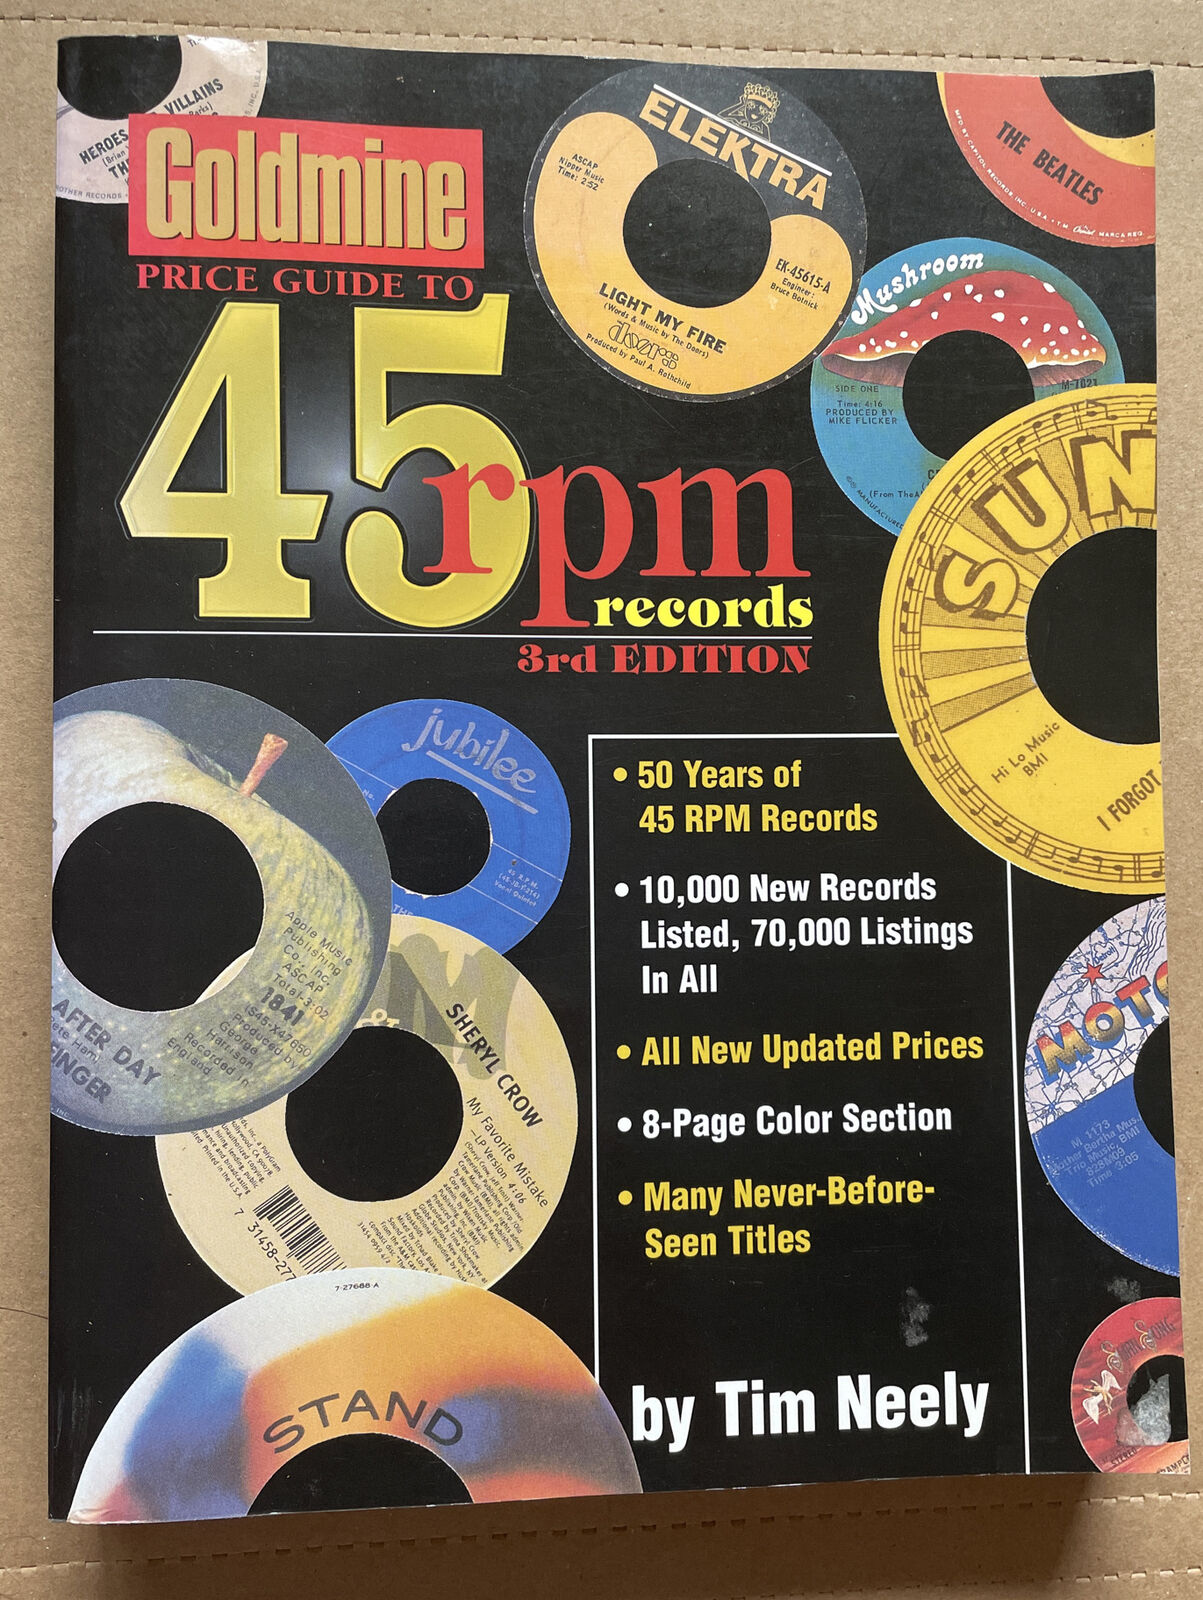 Goldmine Price Guide To 45 Rpm Records Tim Neely (2001, Trade Paperback) 3rd Ed